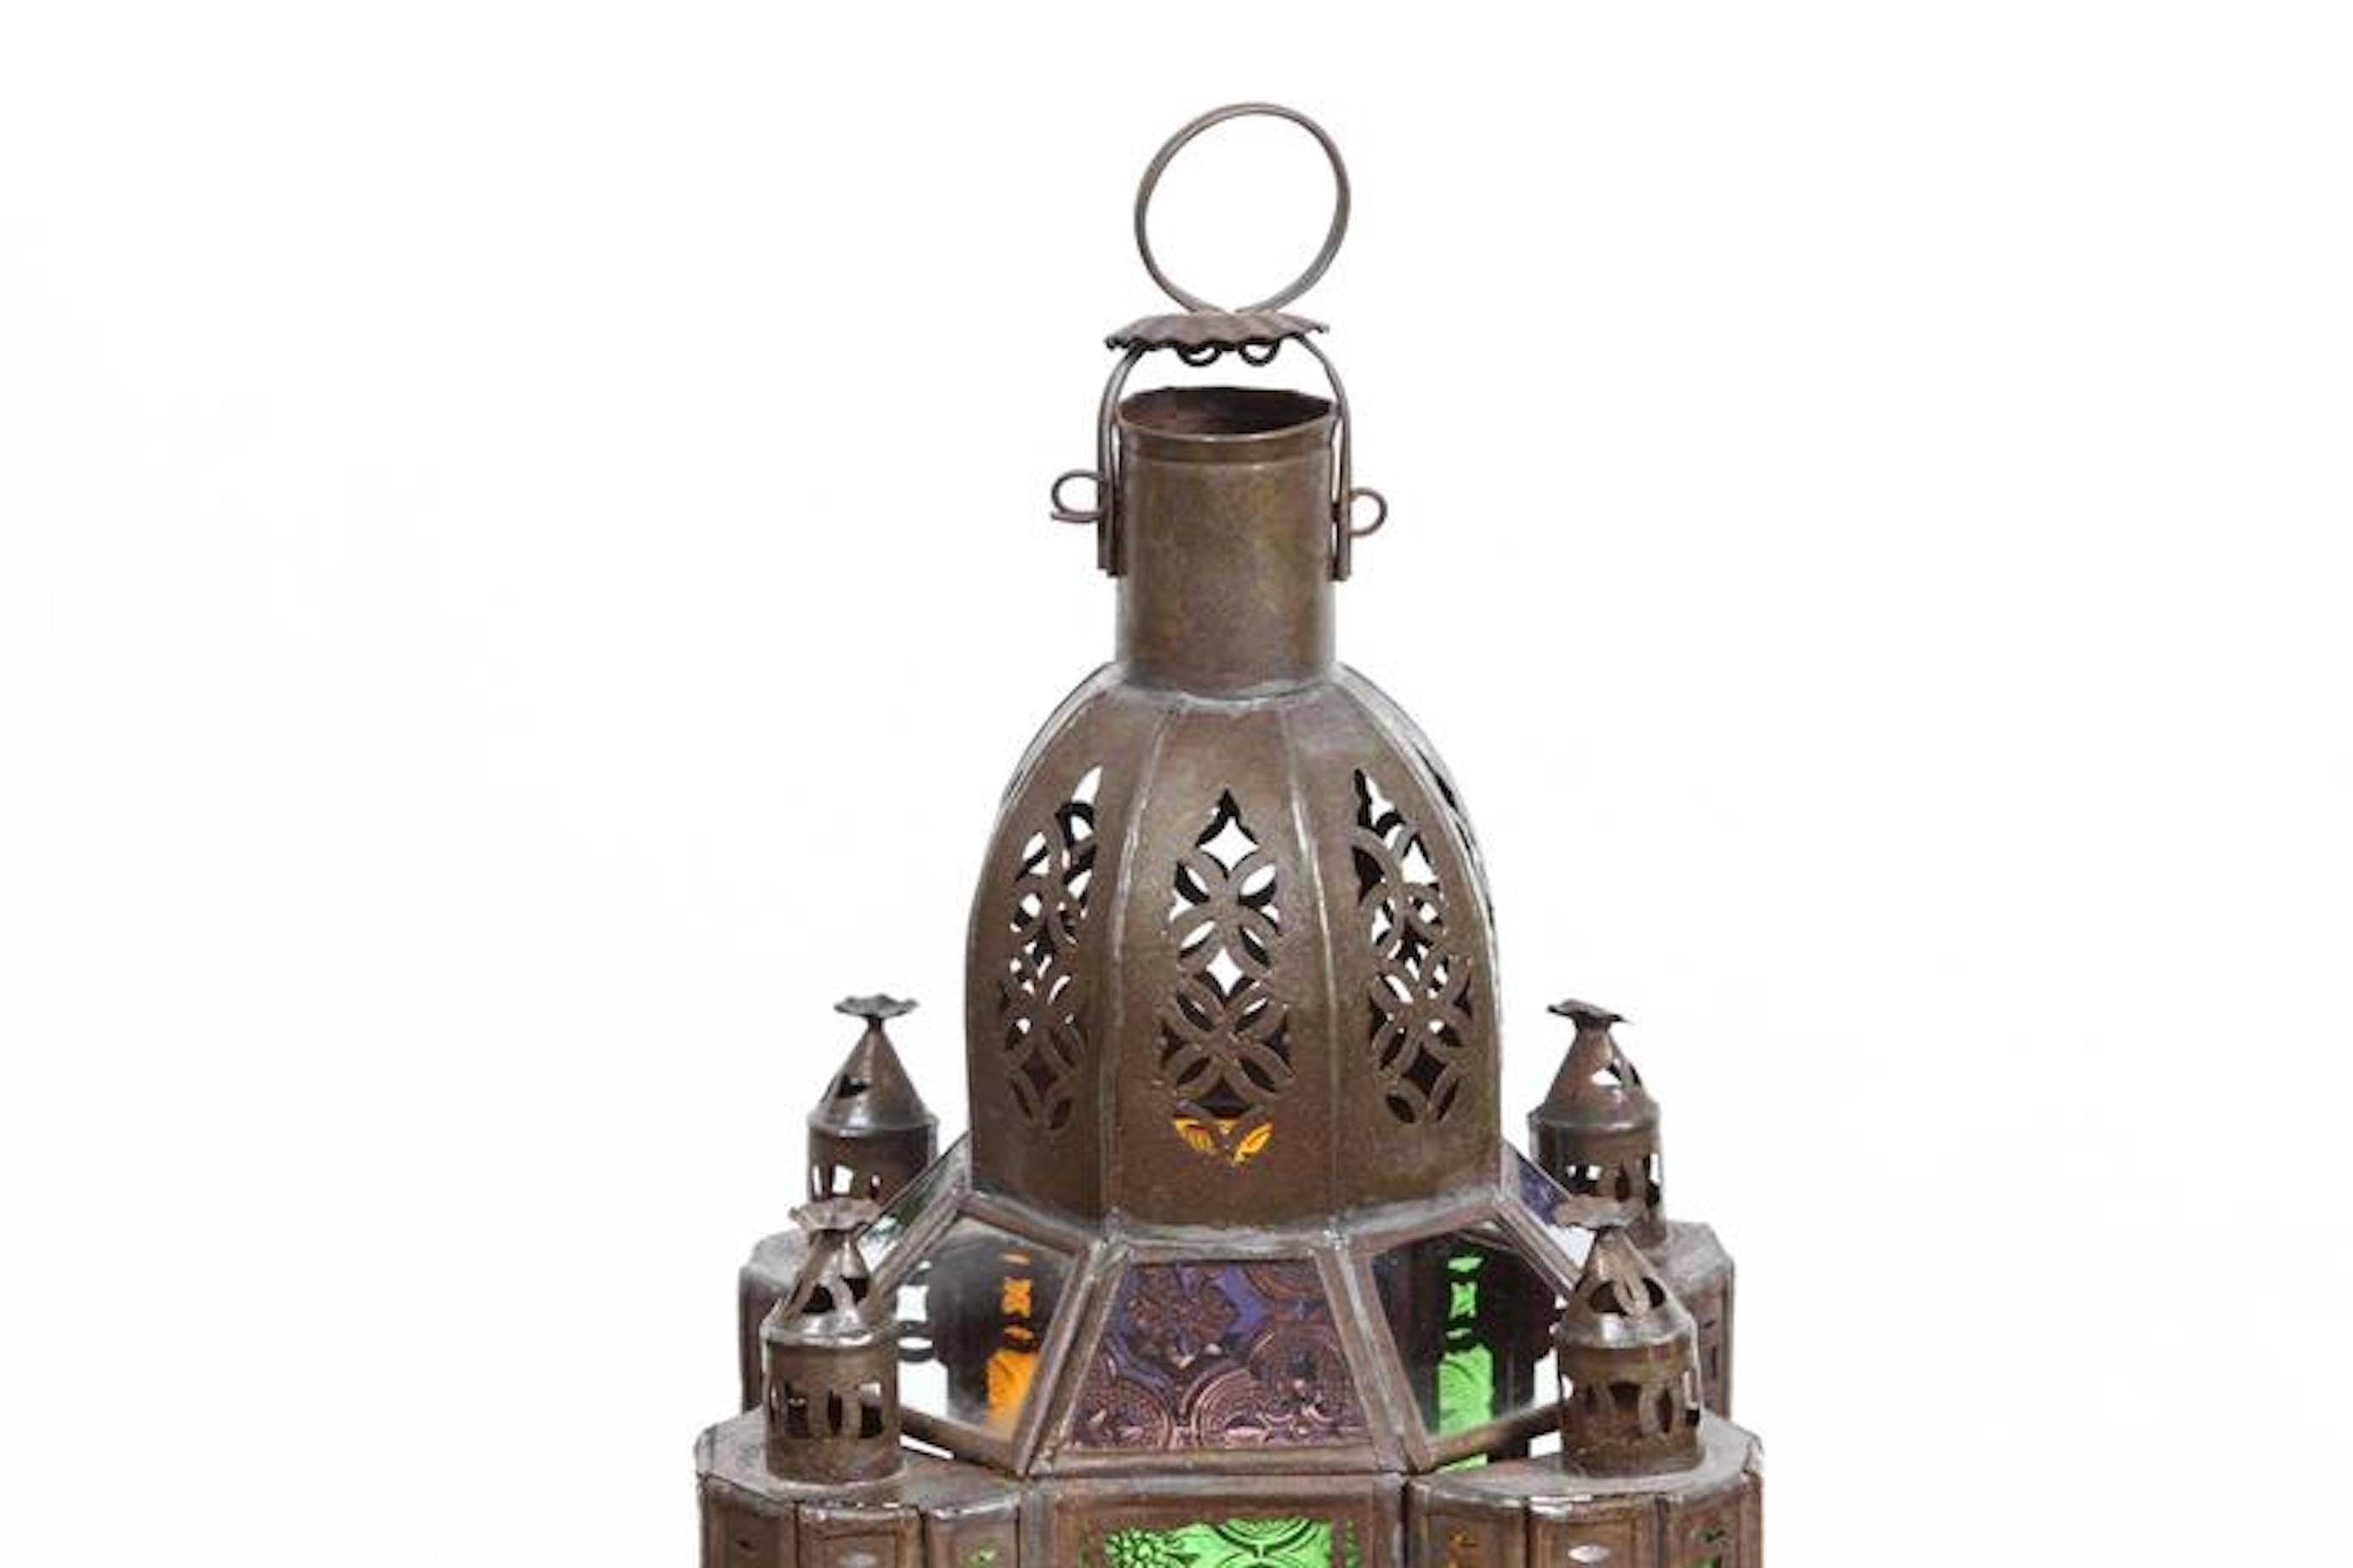 Vintage Moroccan Moorish Metal and Glass Candle Lantern
Handcrafted small Moroccan glass lantern or Moorish pendant.
Multi-color molded glass in green, lavender, blue and clear.
Hurricane candle lamp handmade in Marrakech, vintage metal in rust